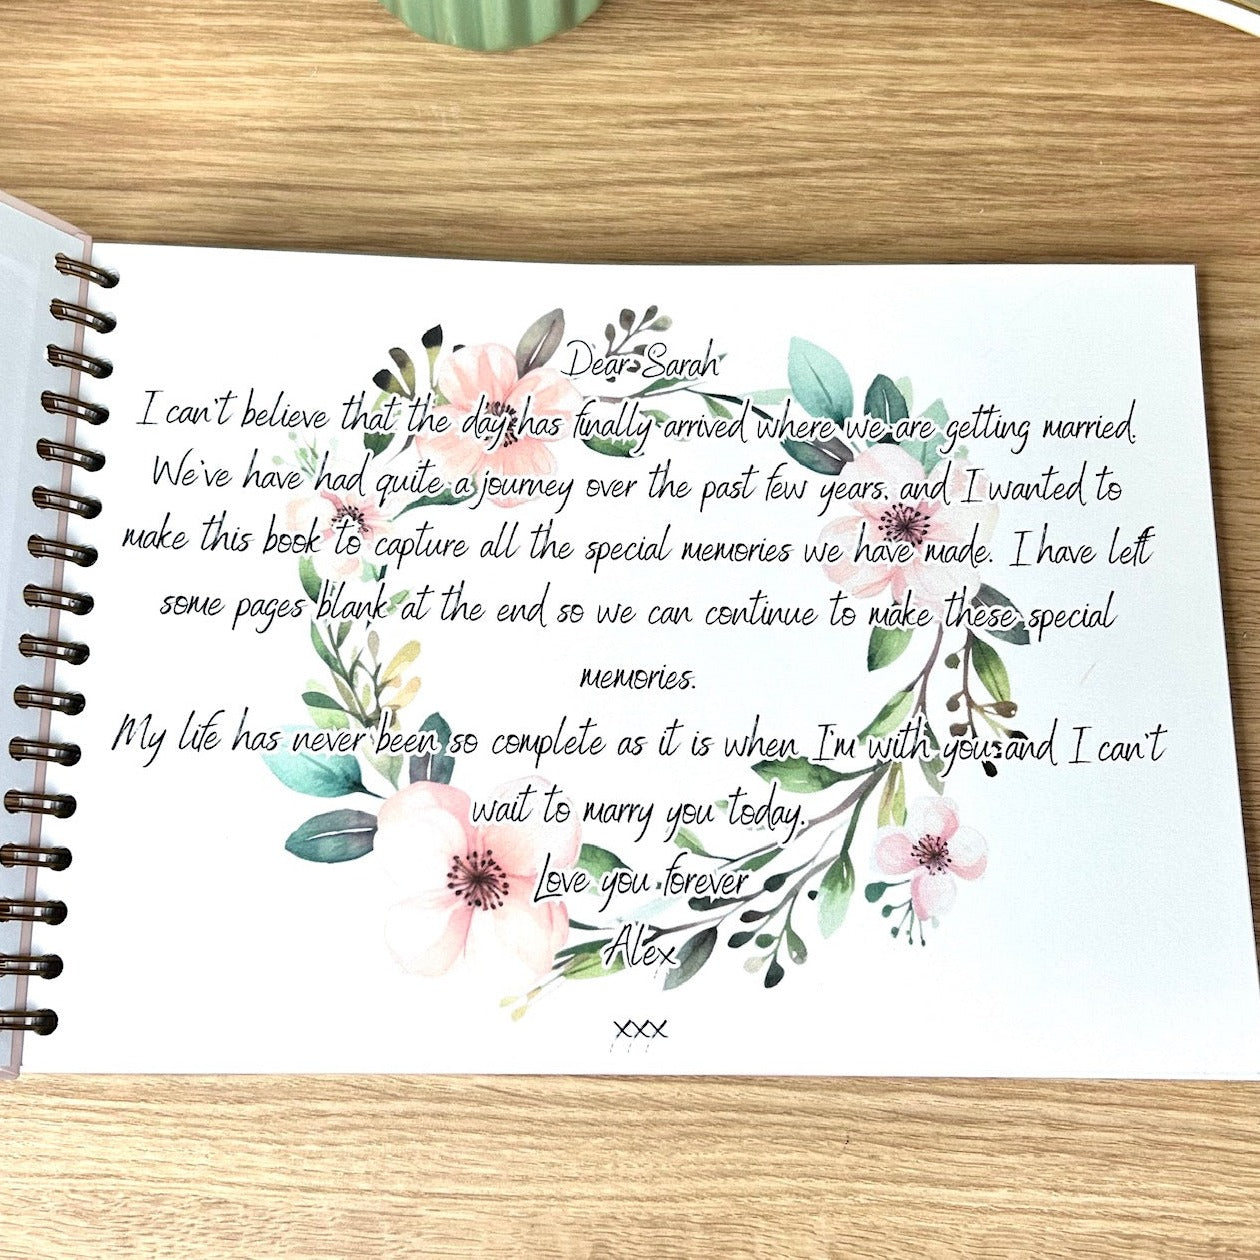 The first page of the 'Our story so far' memory book. It is a heart felt love letter to the recipient with a floral wreath printed as a background